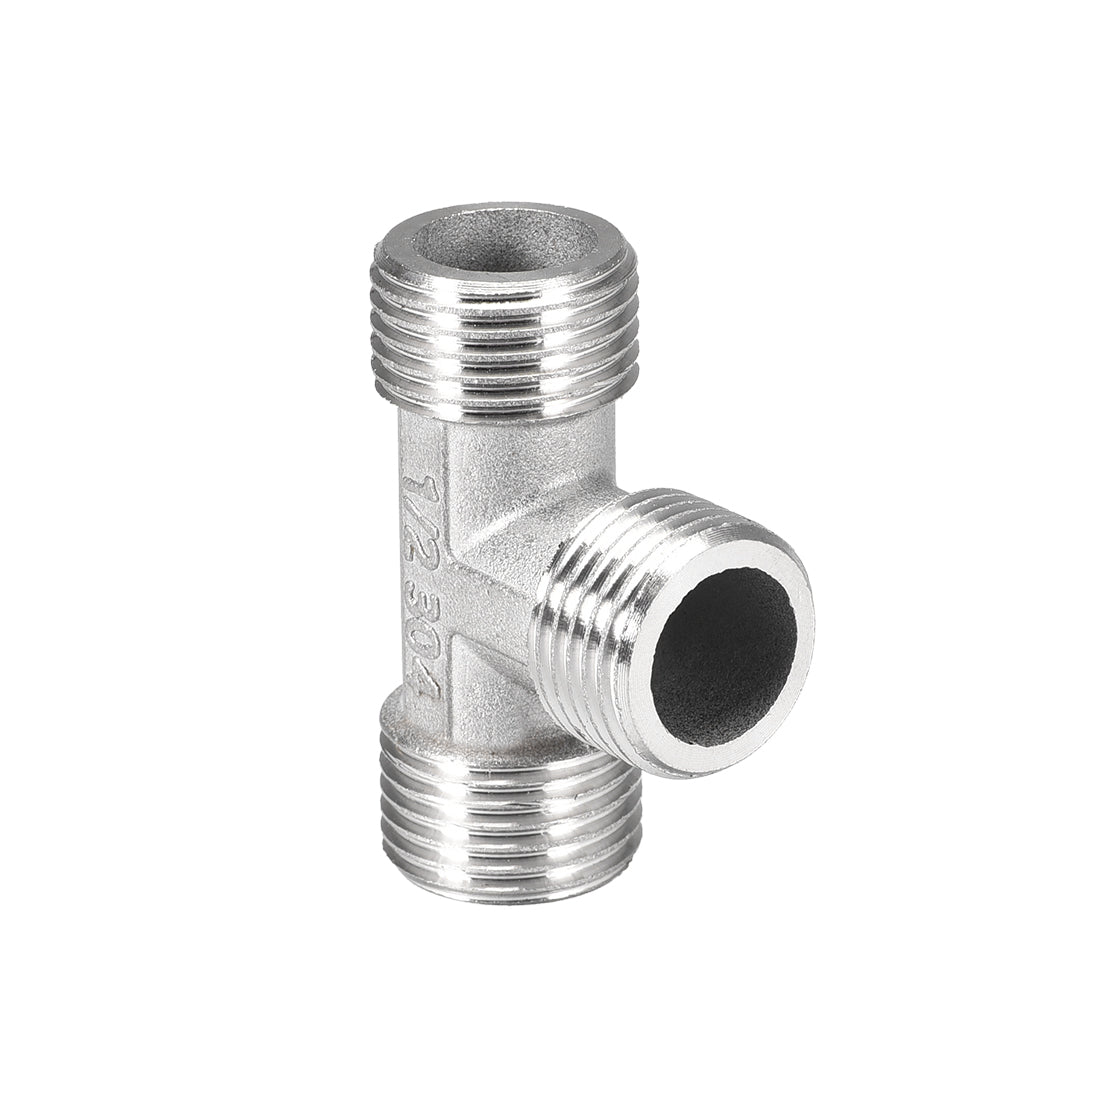 uxcell Uxcell Stainless Steel 304 Cast  Pipe Fitting G1/2 Male Tee Shaped Connector Coupler 2pcs